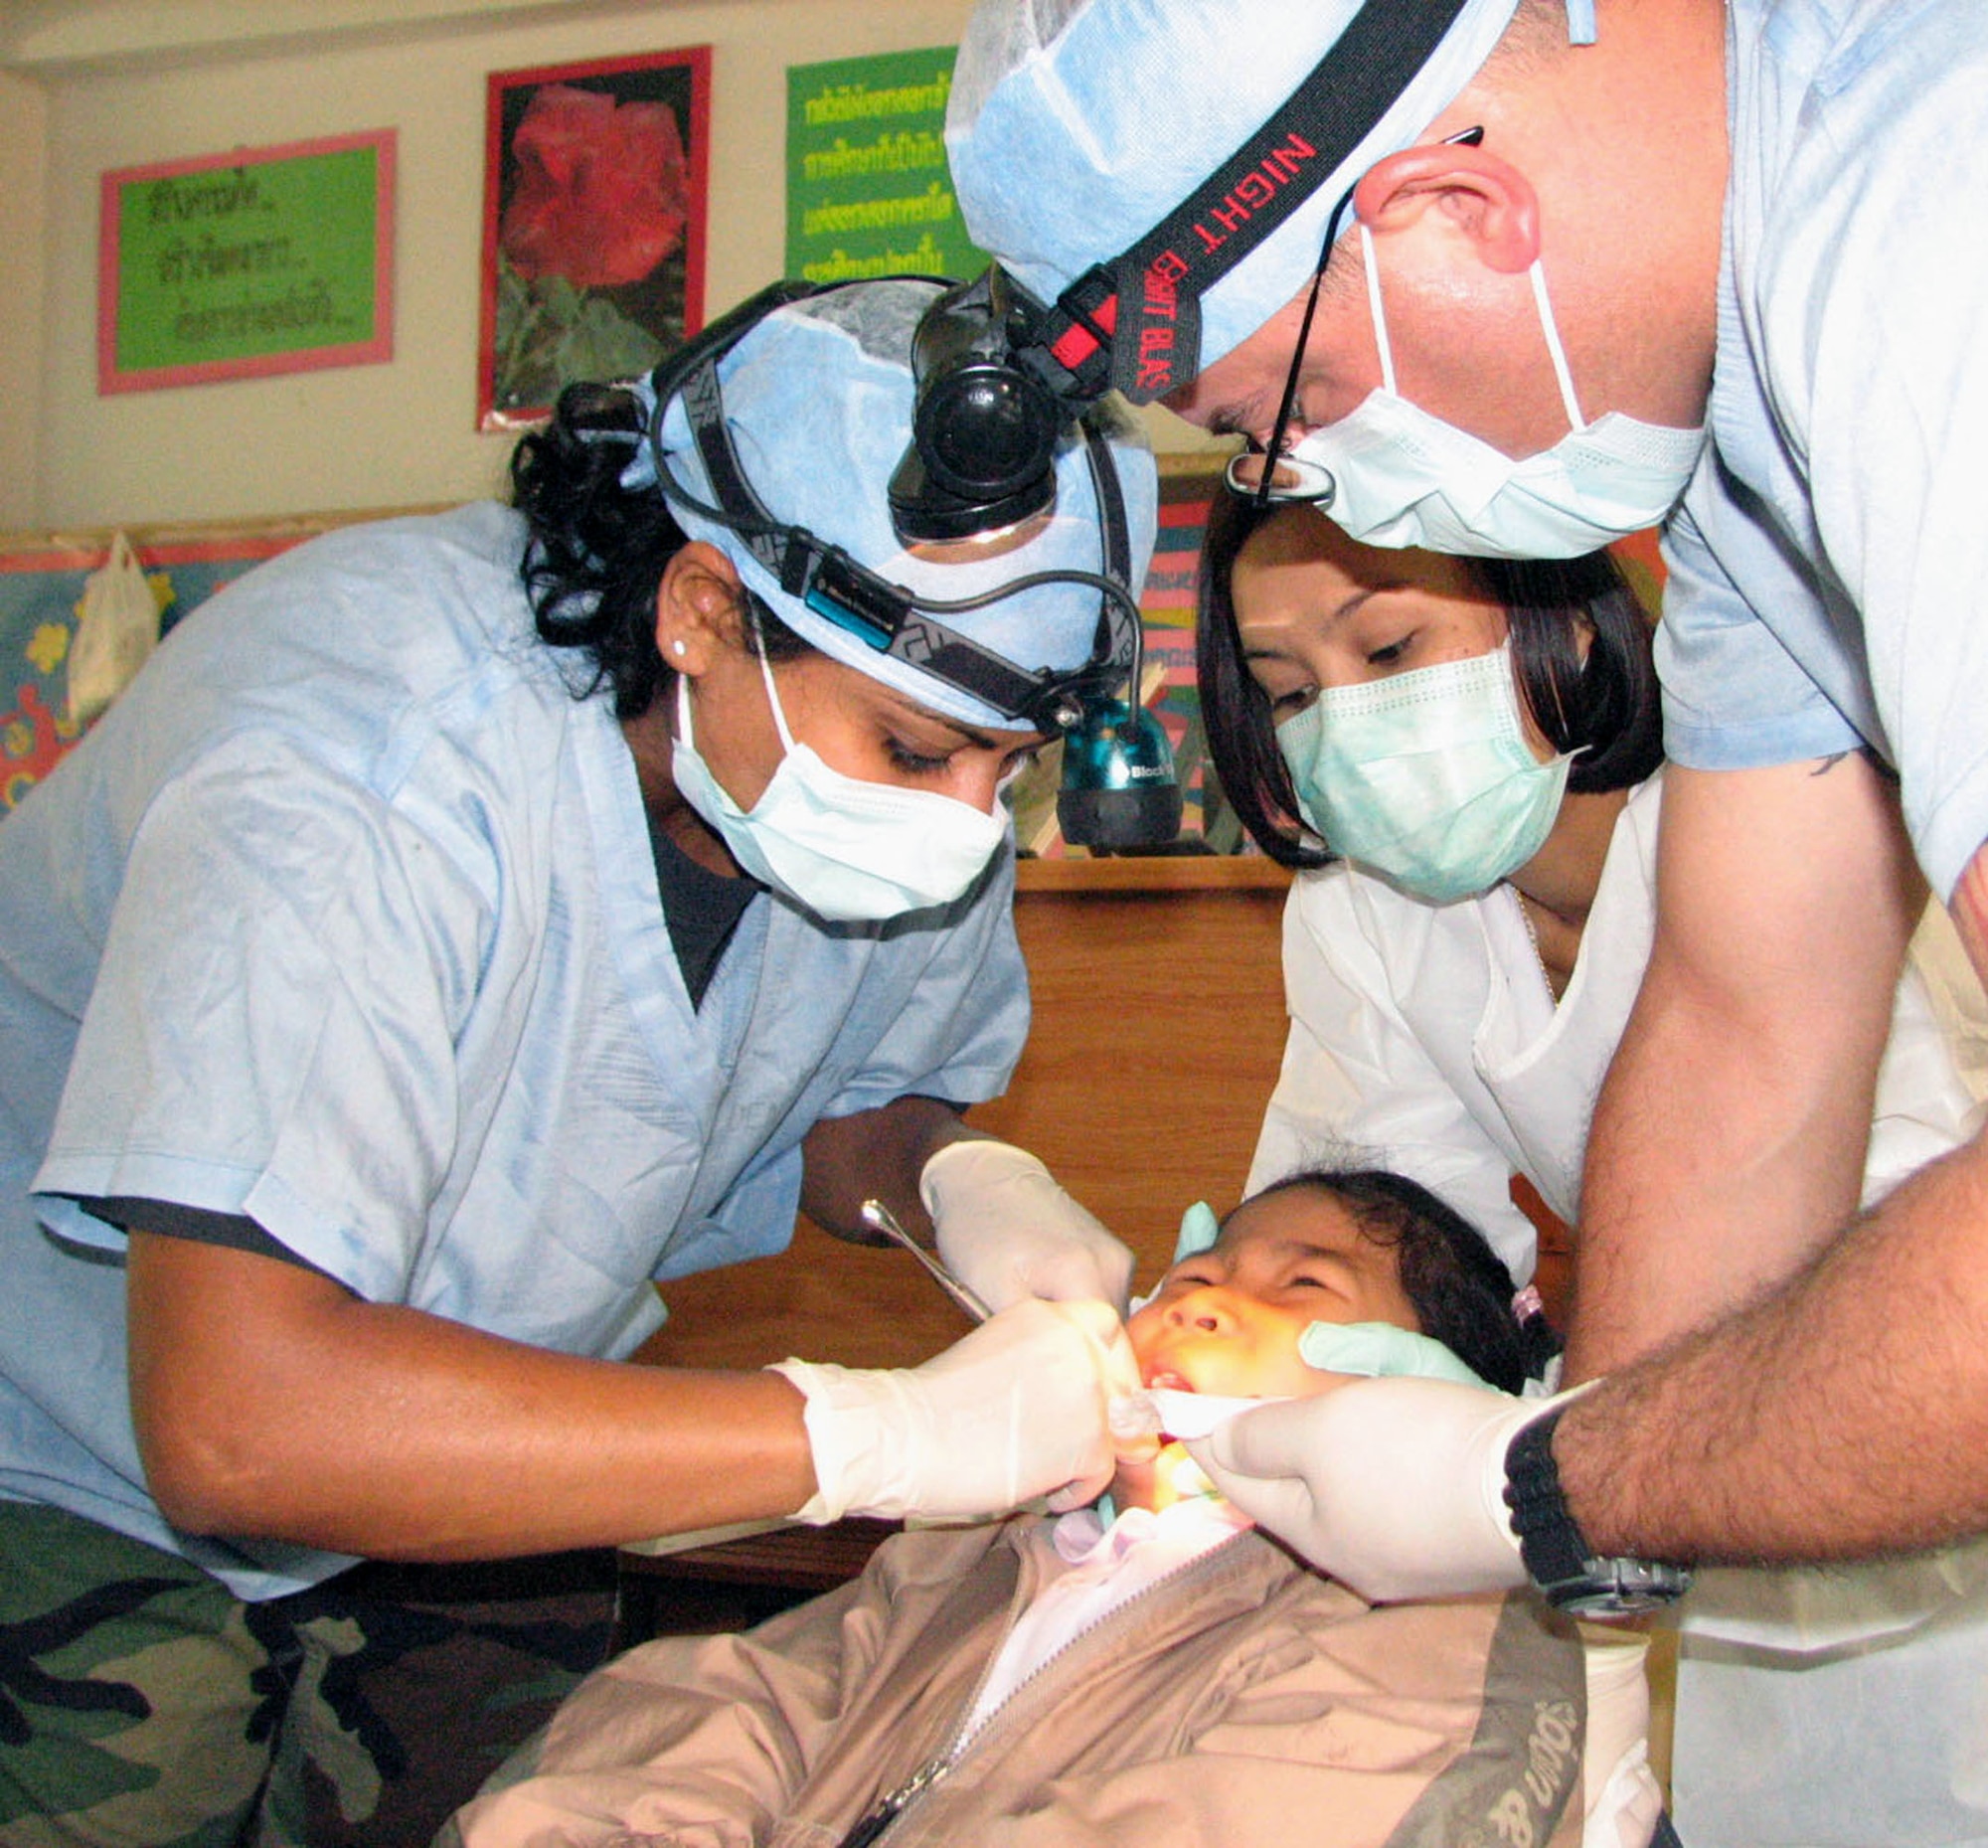 Capt. (Dr.) Ketu Lincoln (left) extracts a tooth from 8-year-old Apiwat Kitjumgnong with assistance from Senior Airman Joel Peace and a Thai dental assistant during a goodwill visit to the Thairat 72 school in Udon Thani, Thailand. This medical-dental goodwill mission is the second civil-action project in Thailand as part of exercise Cope Tiger 2007. Captain Lincoln and Airman Peace are from the 18th Dental Squadron at Kadena Air Base, Japan. (U.S. Air Force photo/Army Sgt. Catherine Talento) 